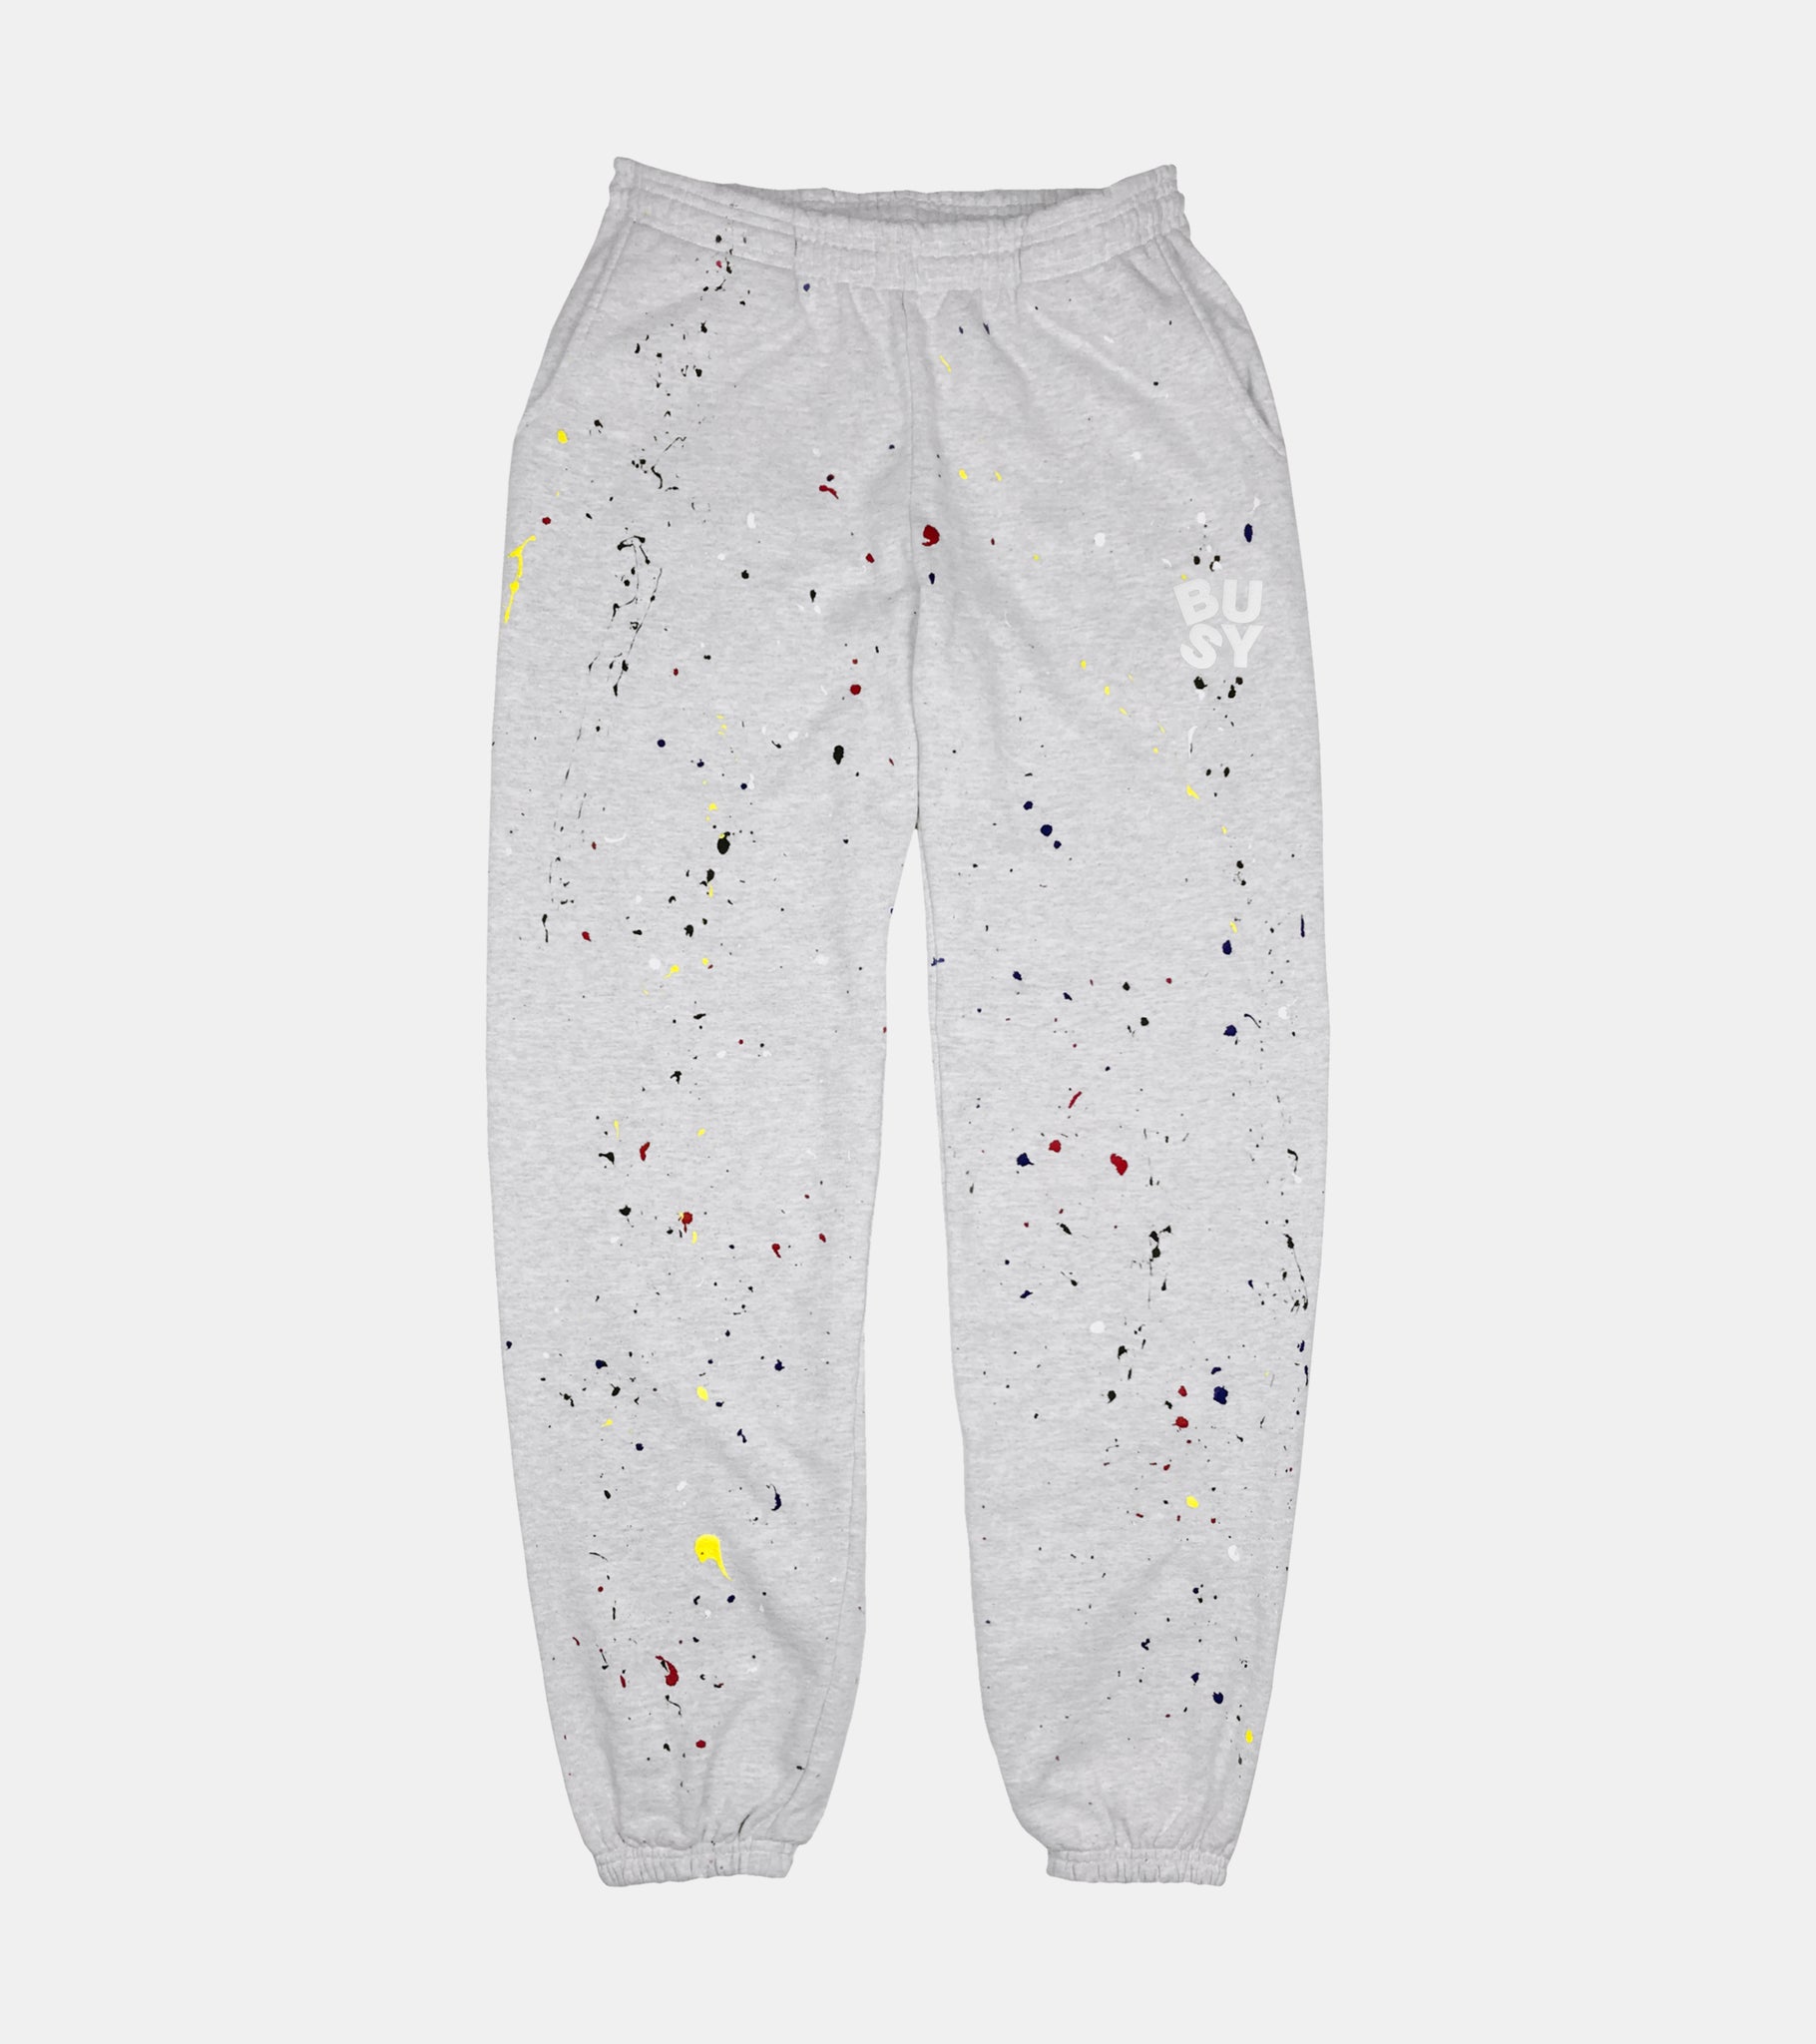 Spellout 'Gumball' Sweatpants - SORRYIMBUSY